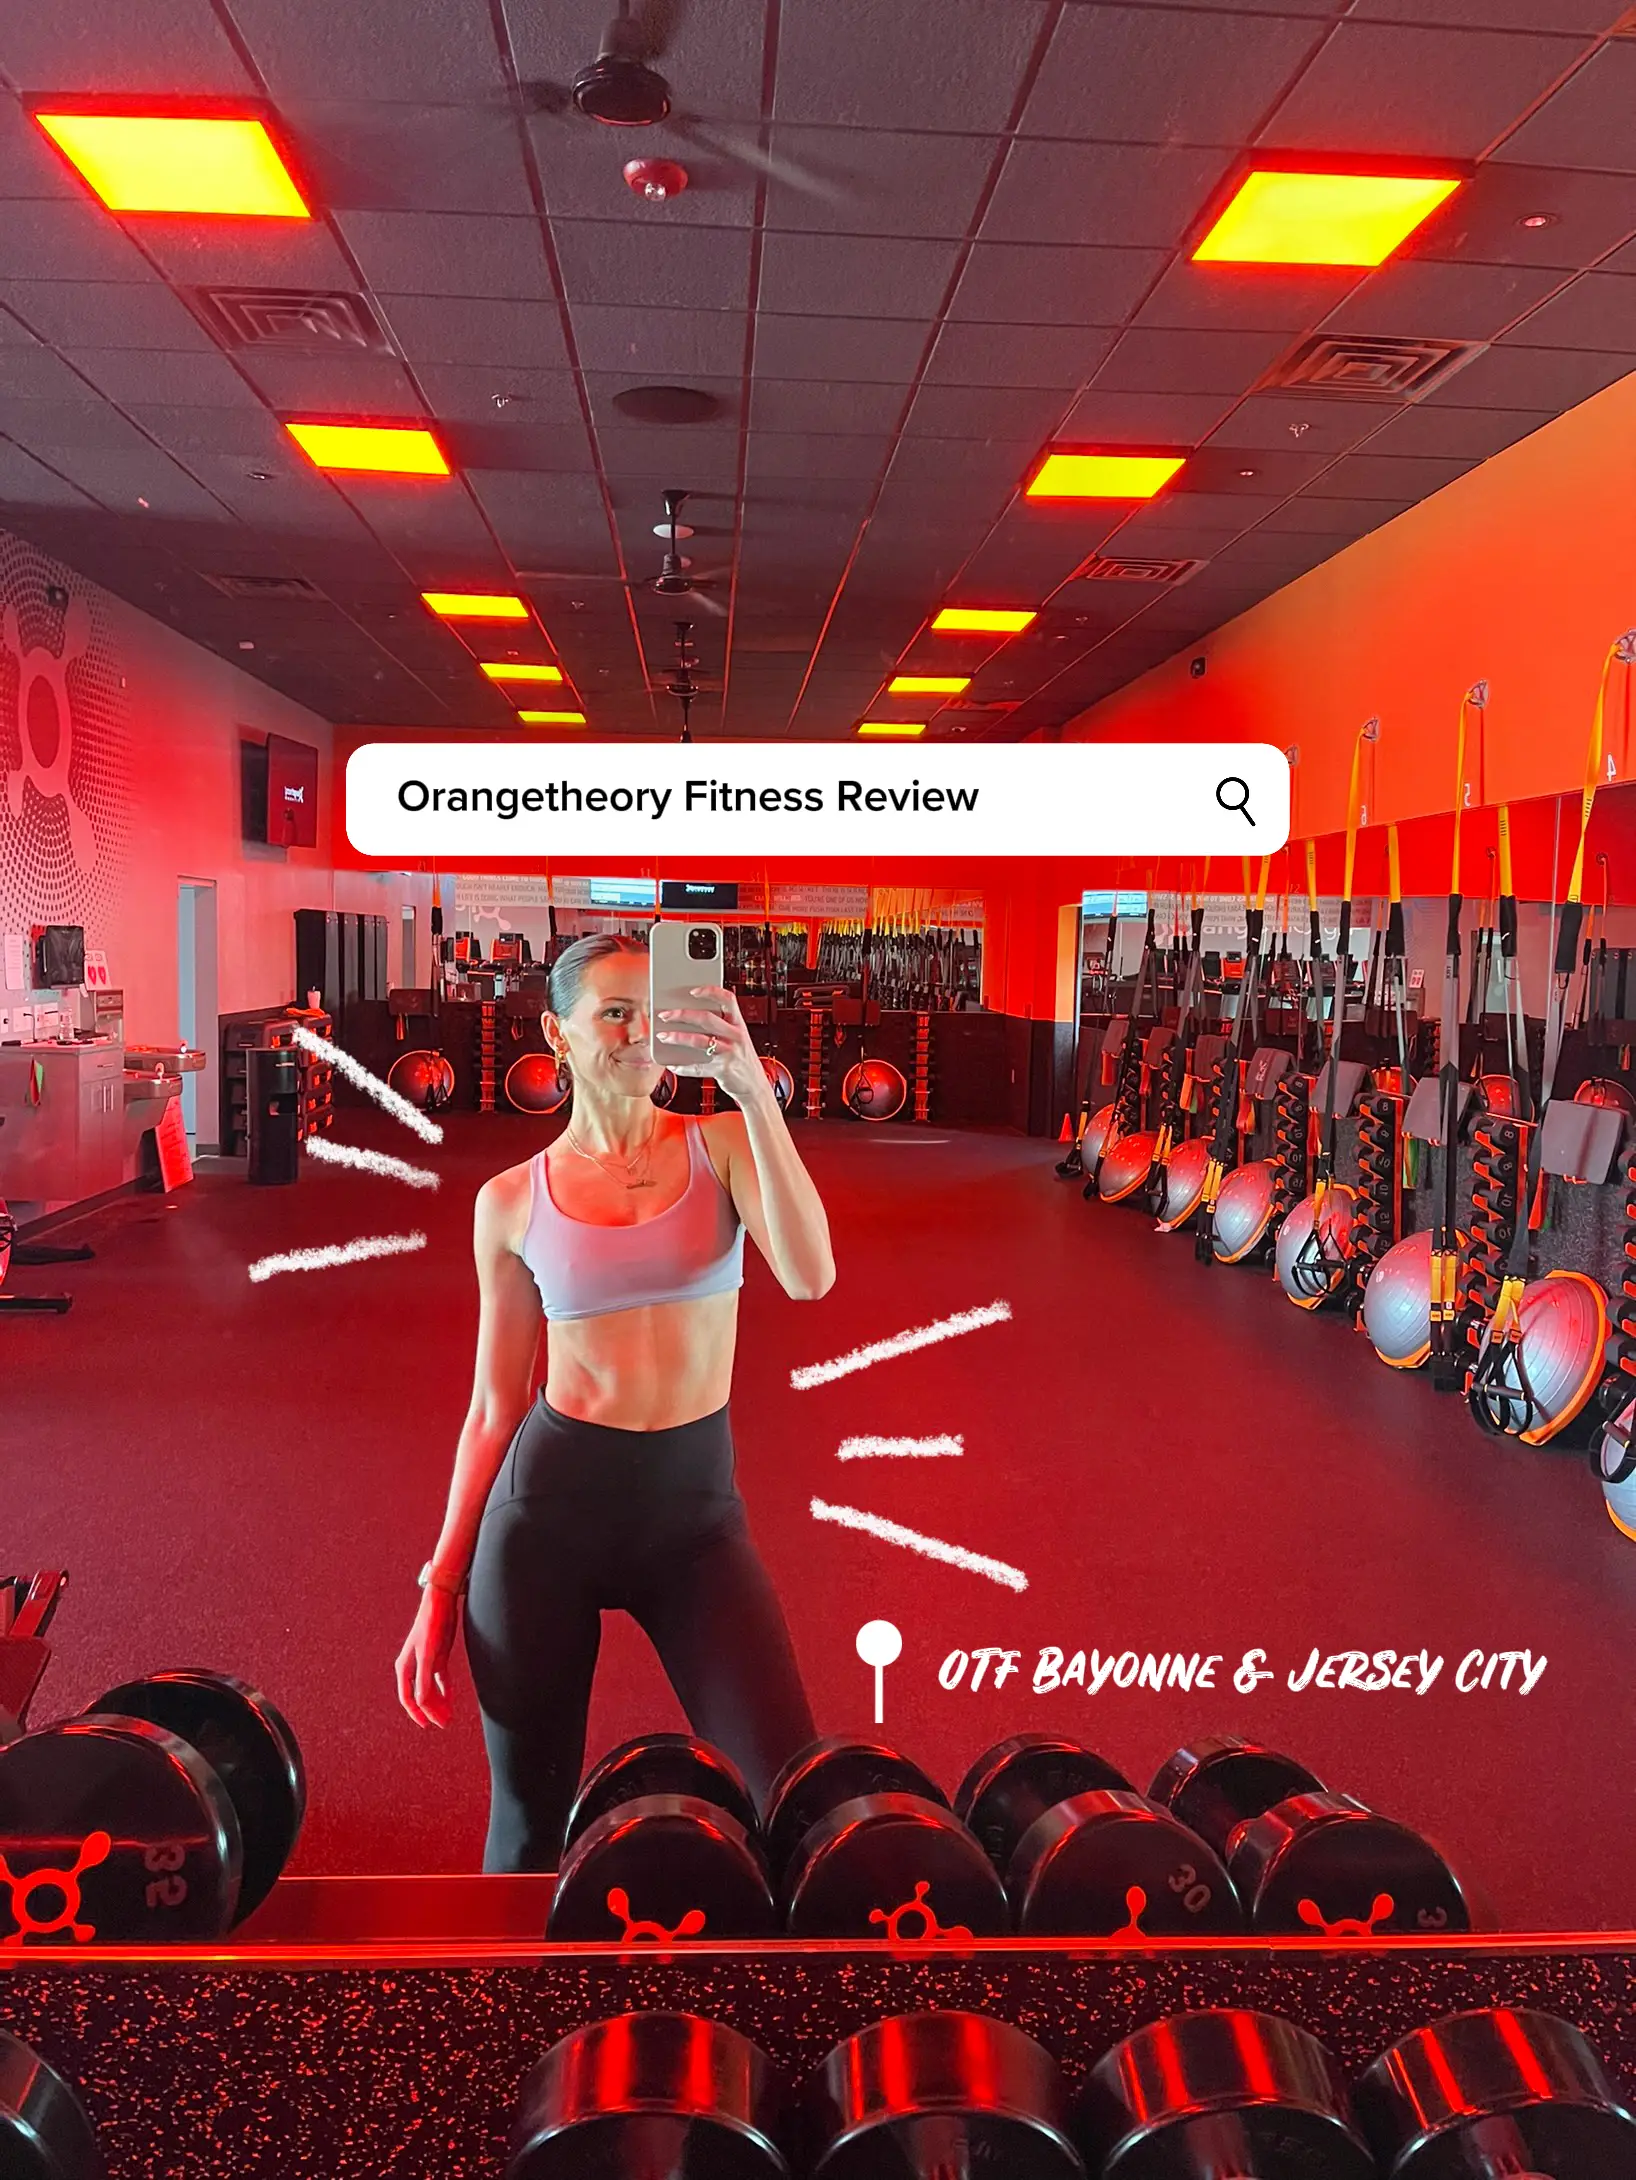  A woman taking a selfie in a gym.